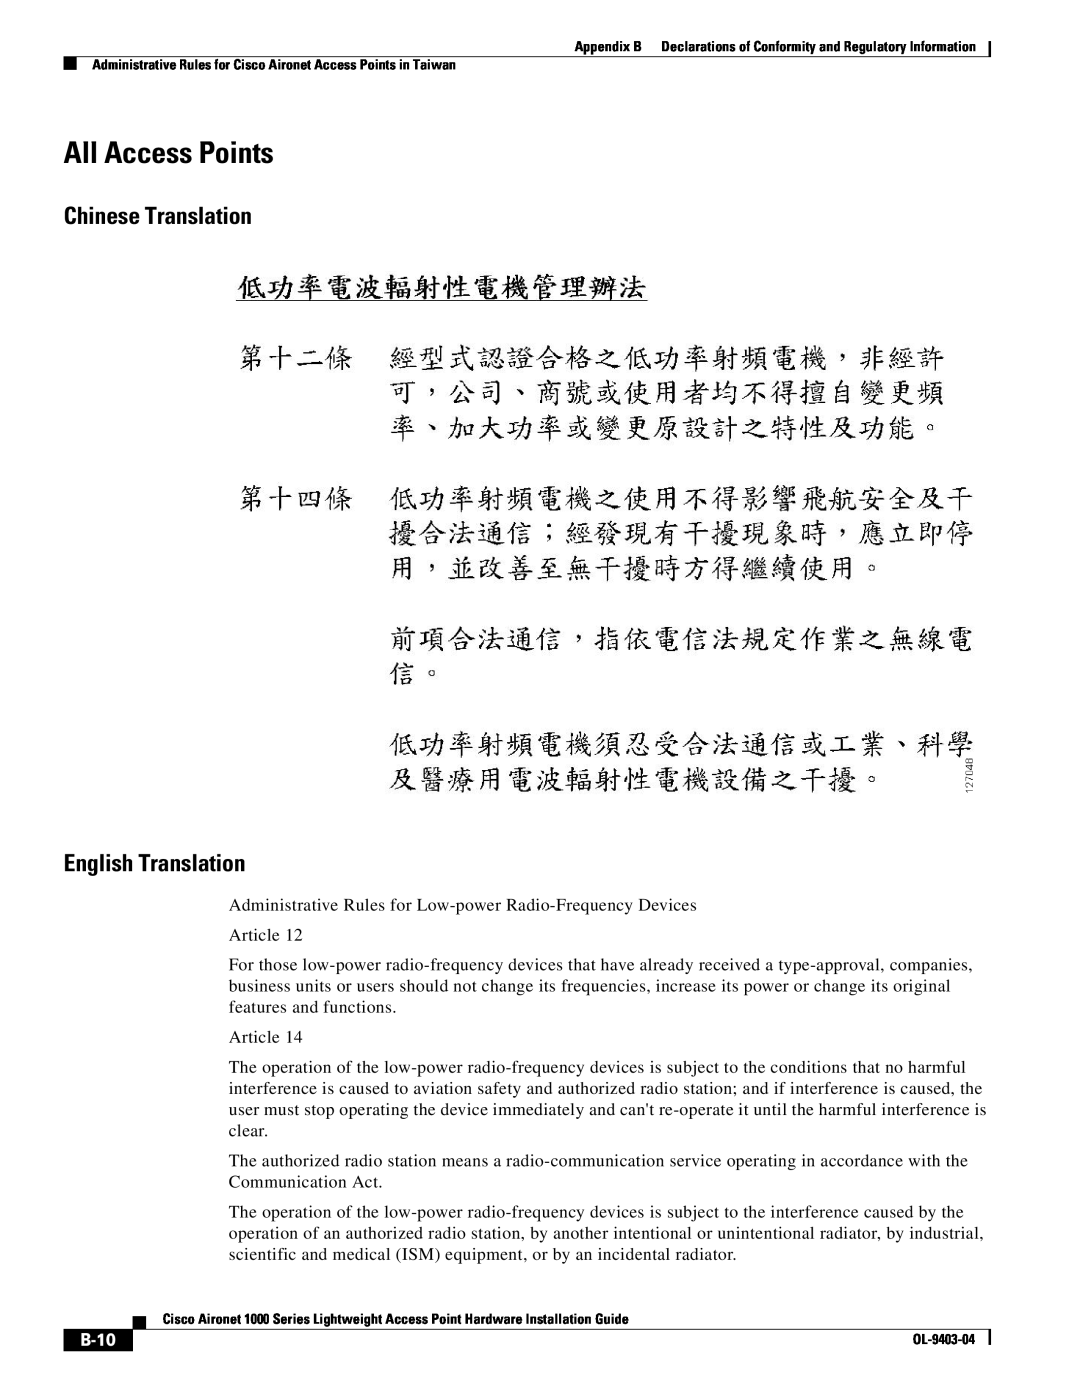 Cisco Systems 2000 appendix All Access Points, B-10, Chinese Translation English Translation 